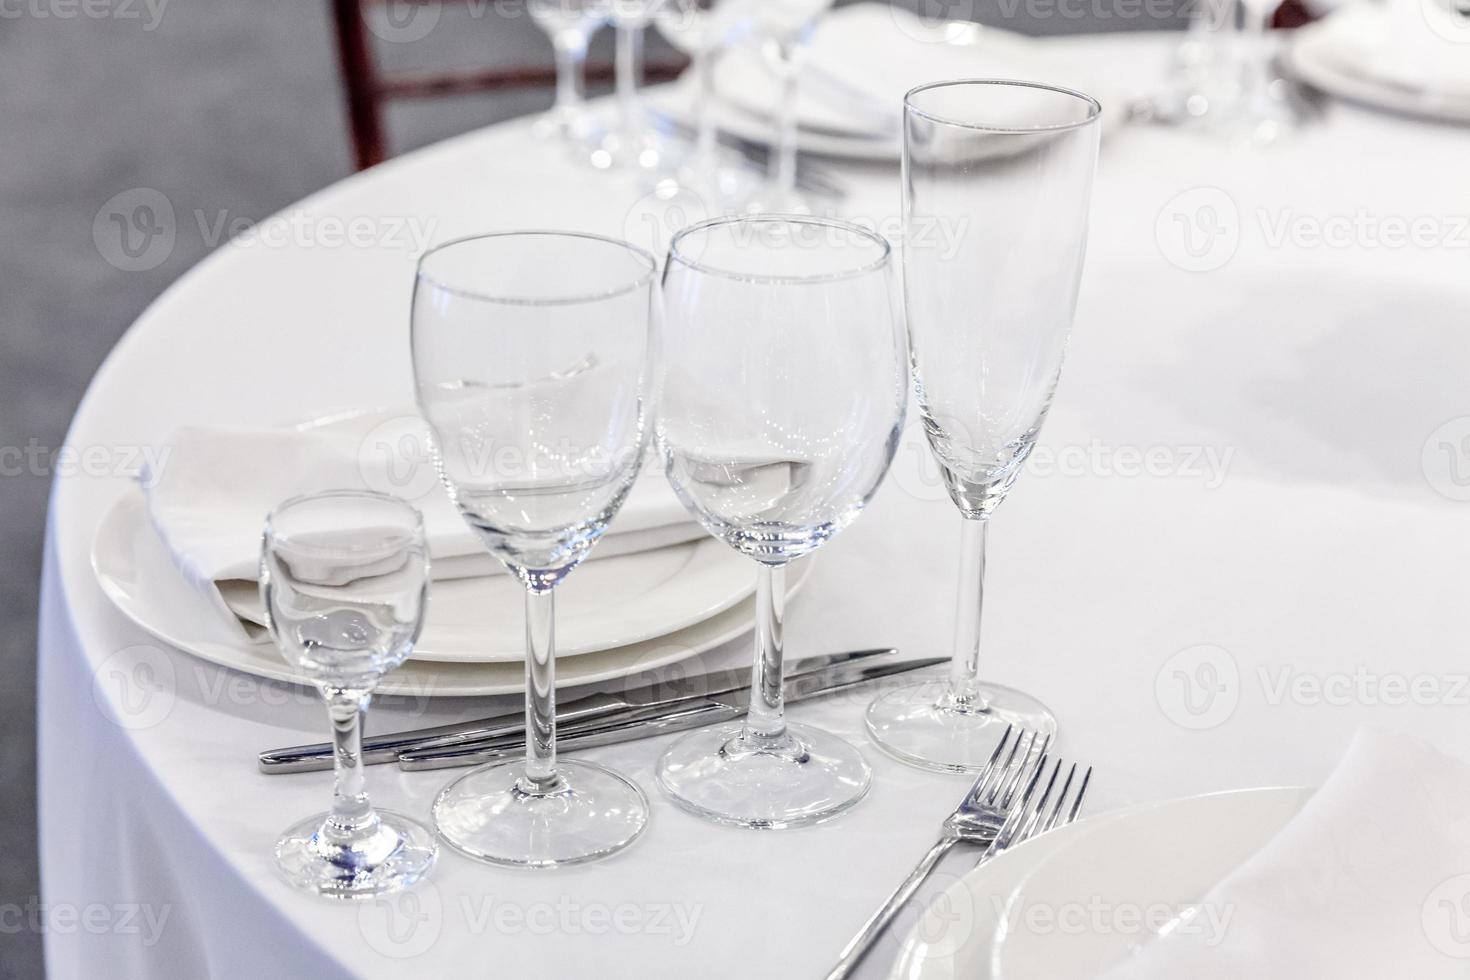 Fancy table set for dinner with napkin glasses in restaurant, luxury interior background. Wedding elegant banquet decoration and items for food arranged by catering service on white tablecloth table. photo